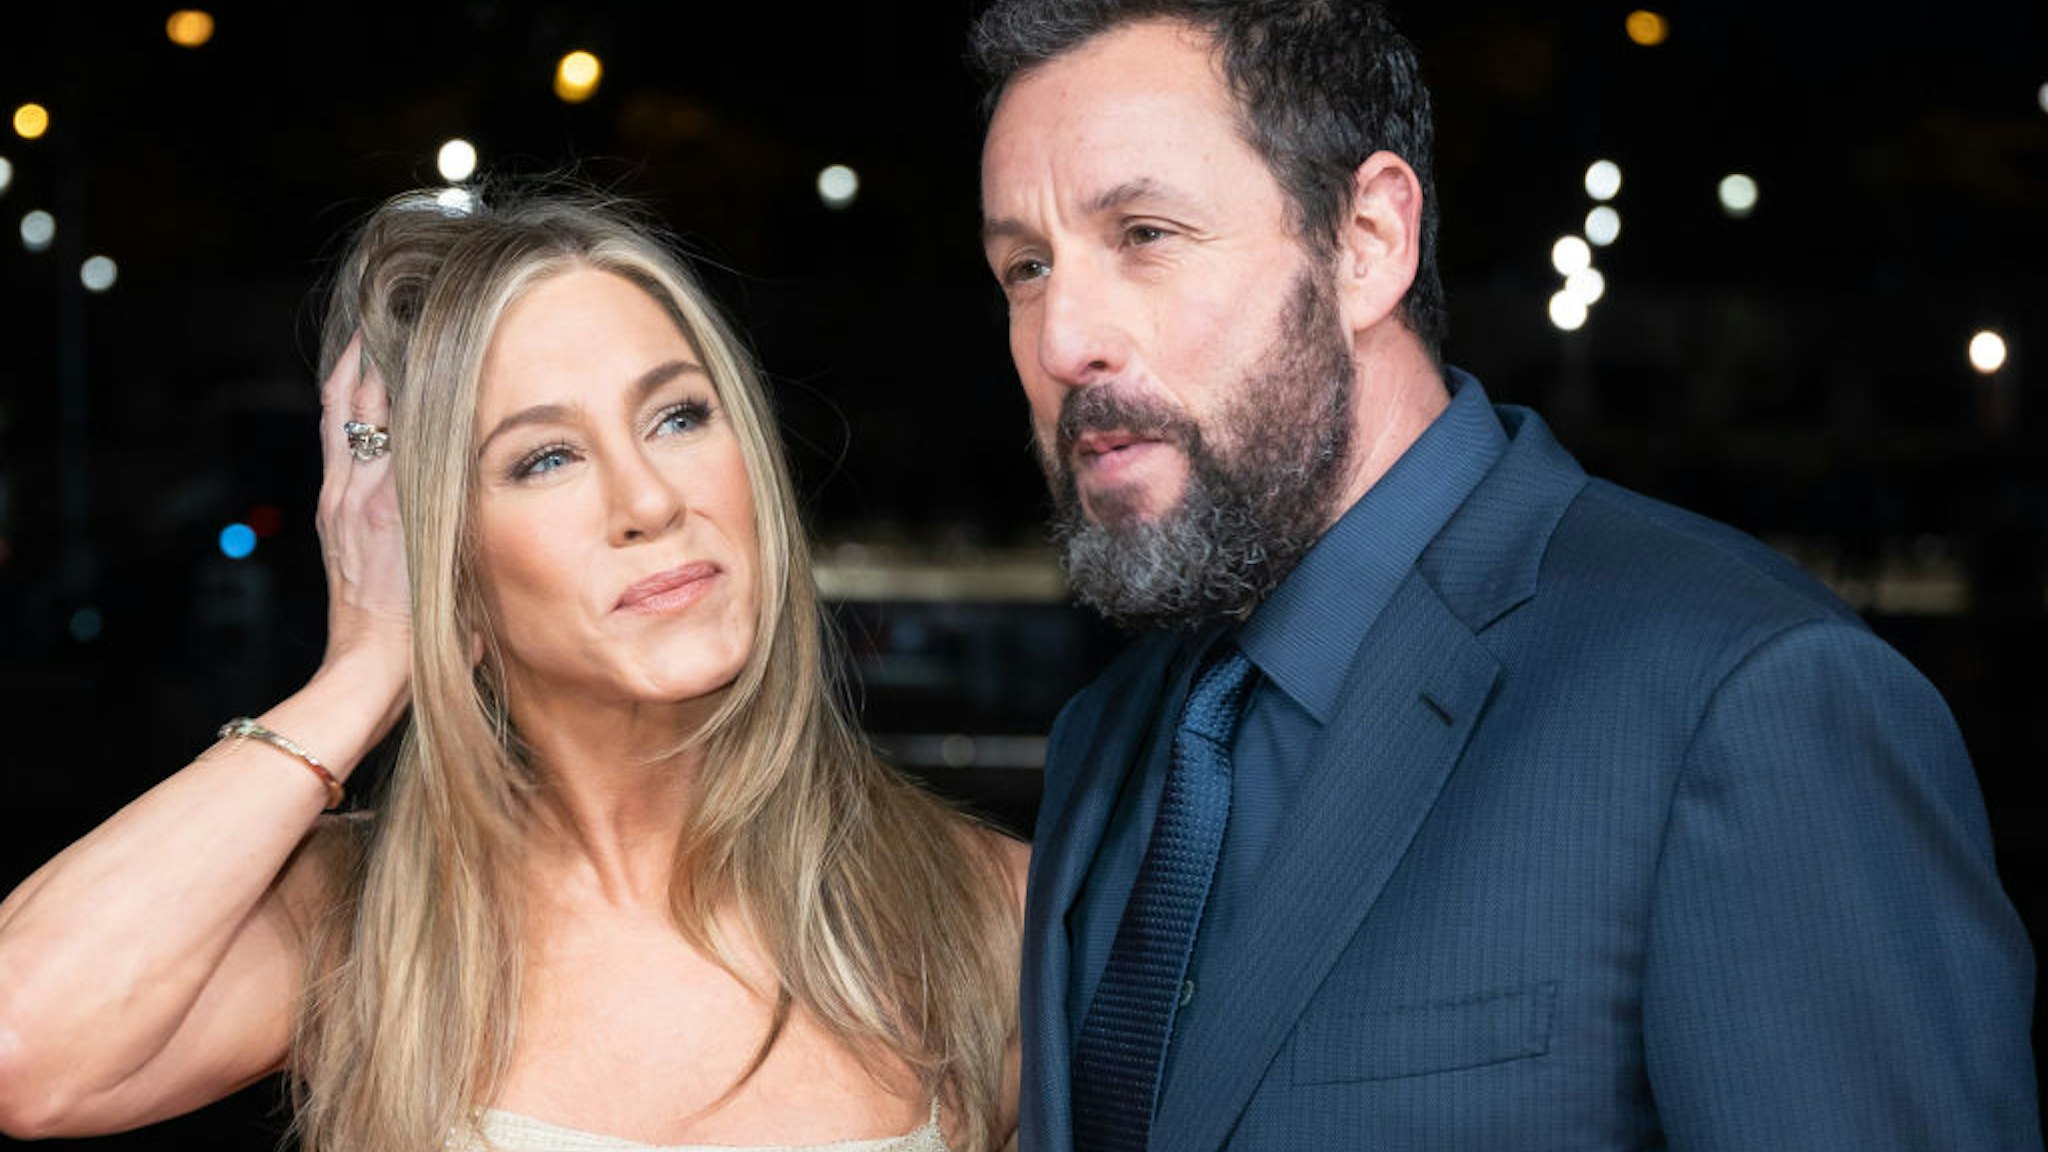 PARIS, FRANCE - MARCH 16: (L-R) Jennifer Aniston and Adam Sandler attend the "Murder Mystery 2" photocall at Pont Debilly on March 16, 2023 in Paris, France. (Photo by Marc Piasecki/WireImage)